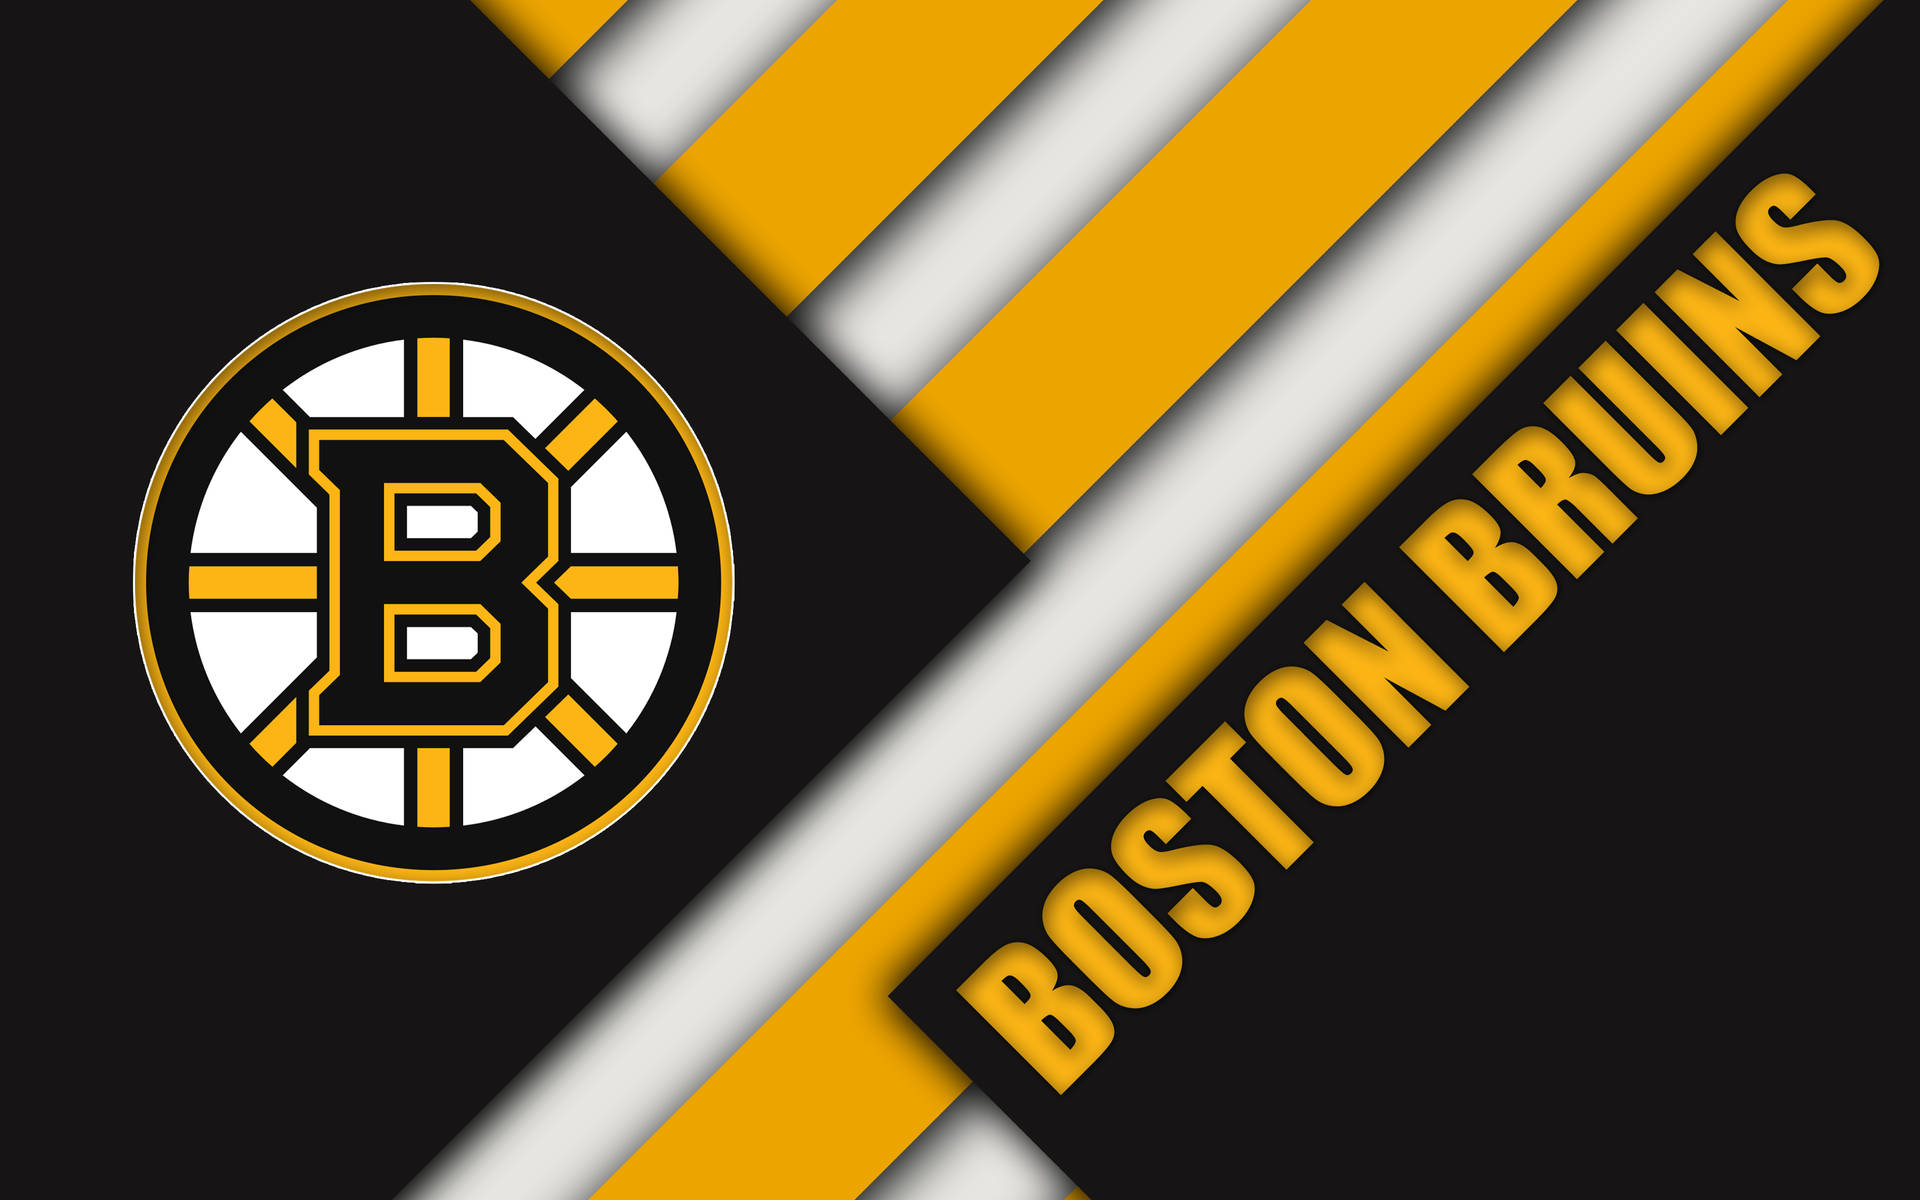 Bostonbruins Diagonal Translates To Boston Bruins Diagonal In Swedish. (in The Context Of Computer Or Mobile Wallpaper, Proper Nouns Are Often Left In Their Original Language.) Wallpaper